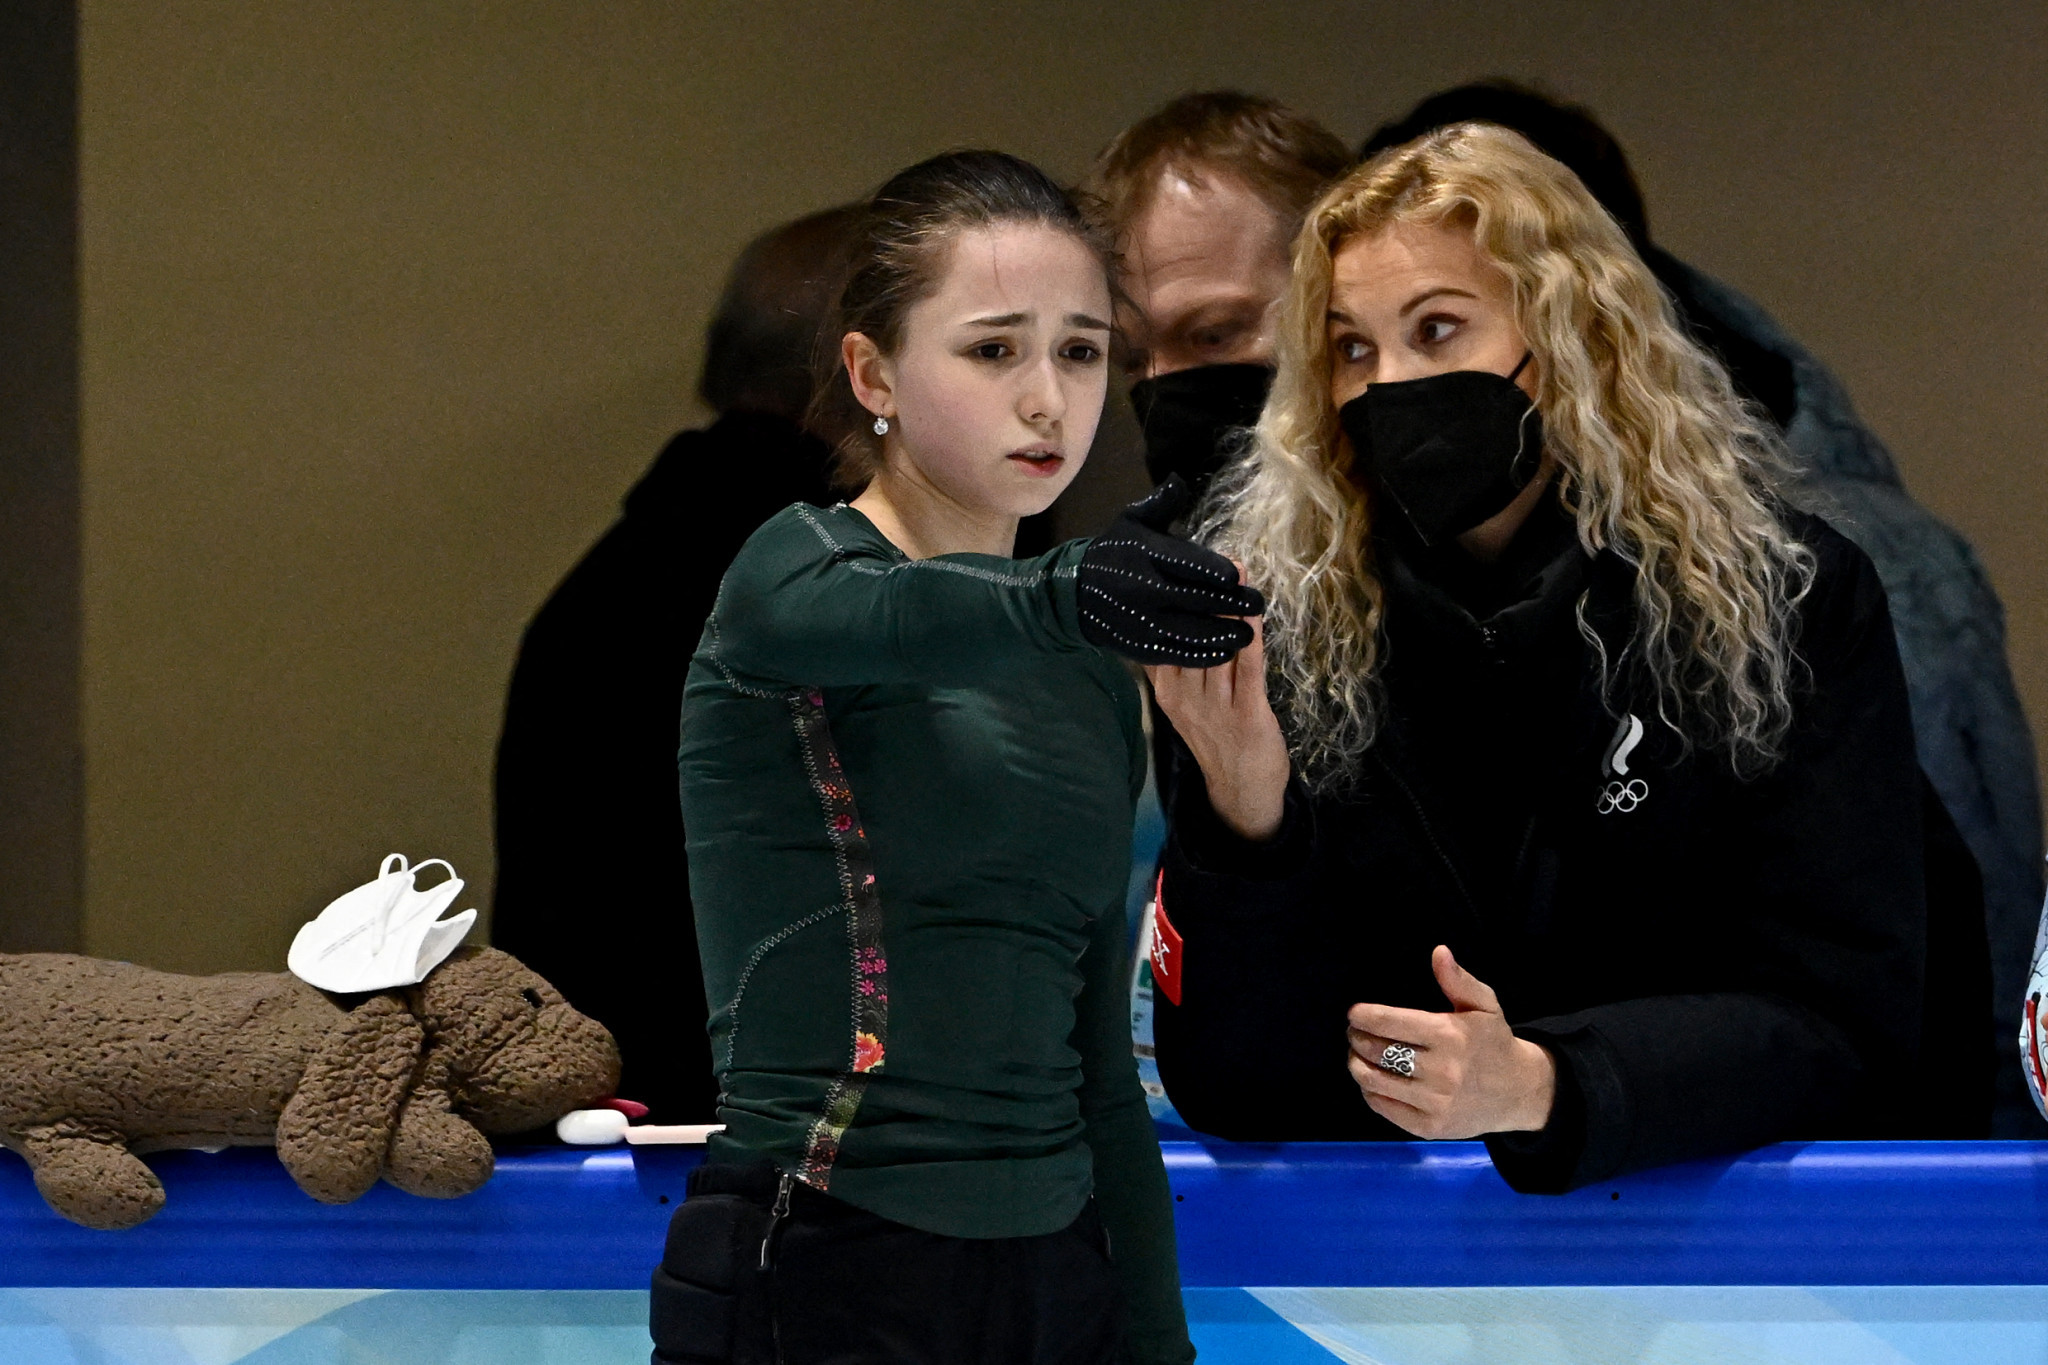 Kamila Valieva's coach Eteri Tutberidze, right, has been the subject of criticism in Russia following news that her young protégé had failed a doping case and faces being suspended from Beijing 2022 ©Getty Images